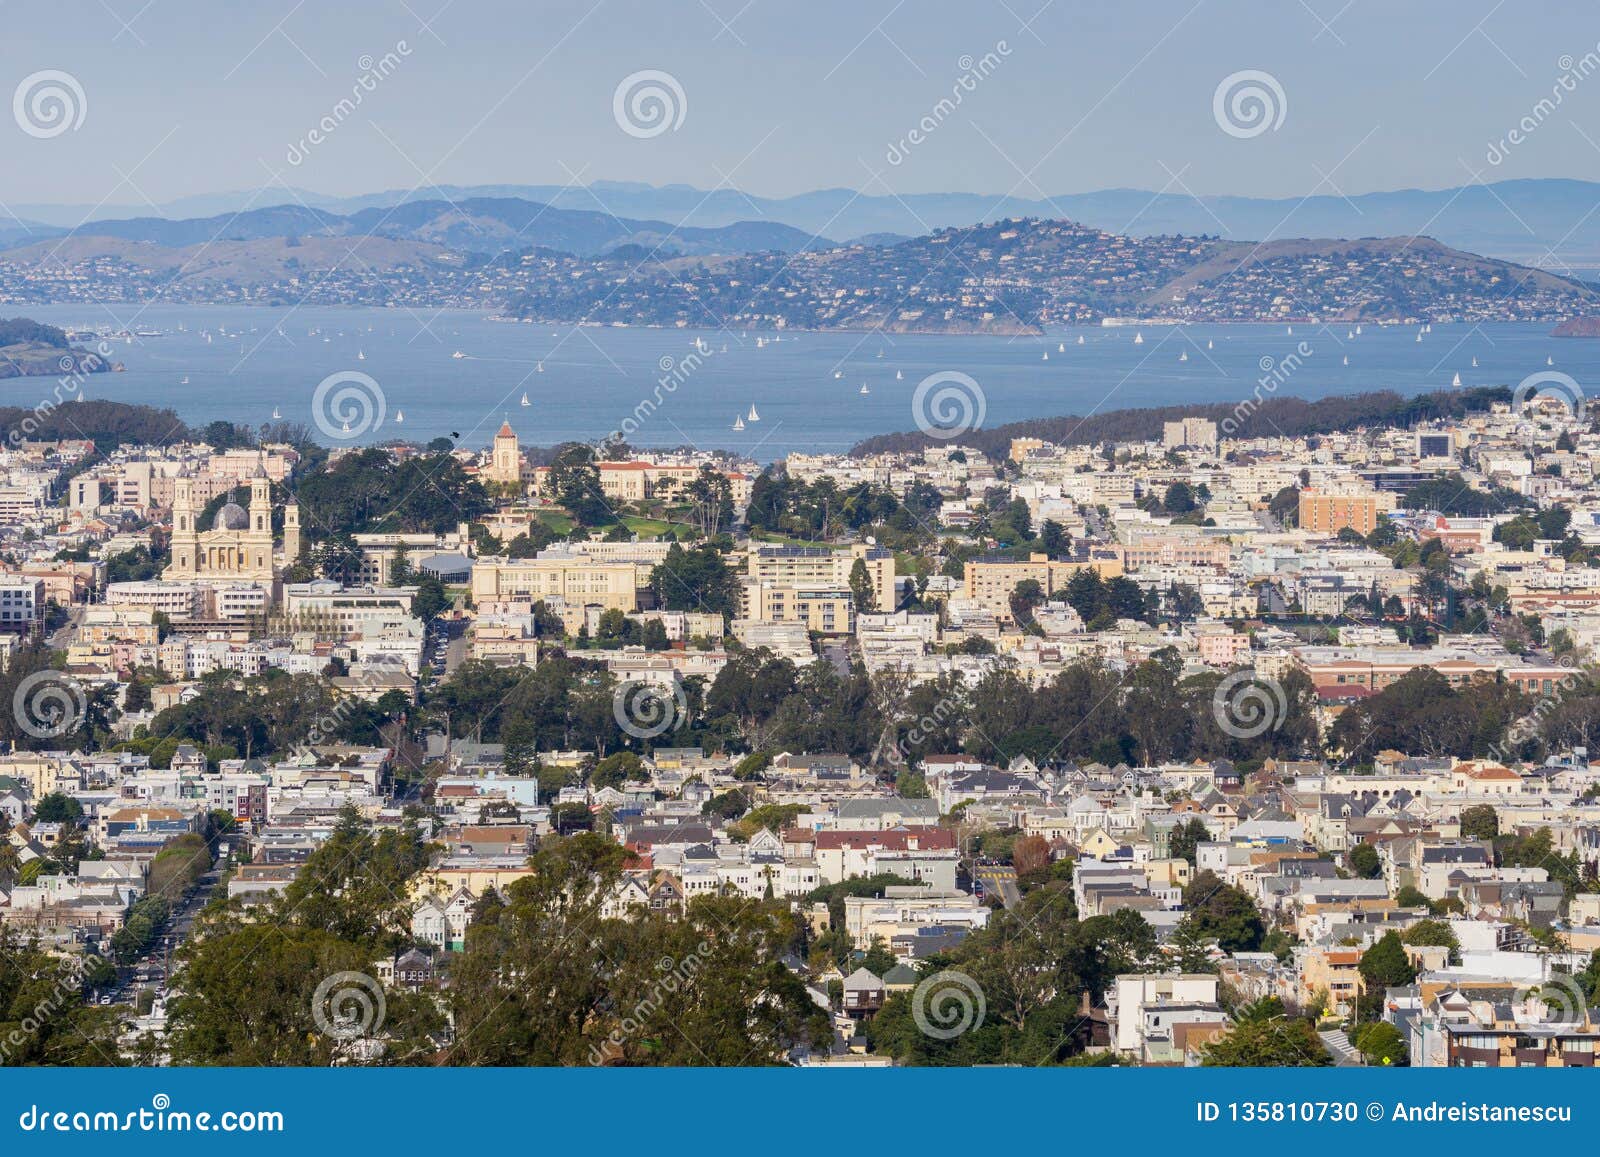 view towards pacific heights and marina district neighborhoods; san francisco bay and belvedere in the background, san francisco,